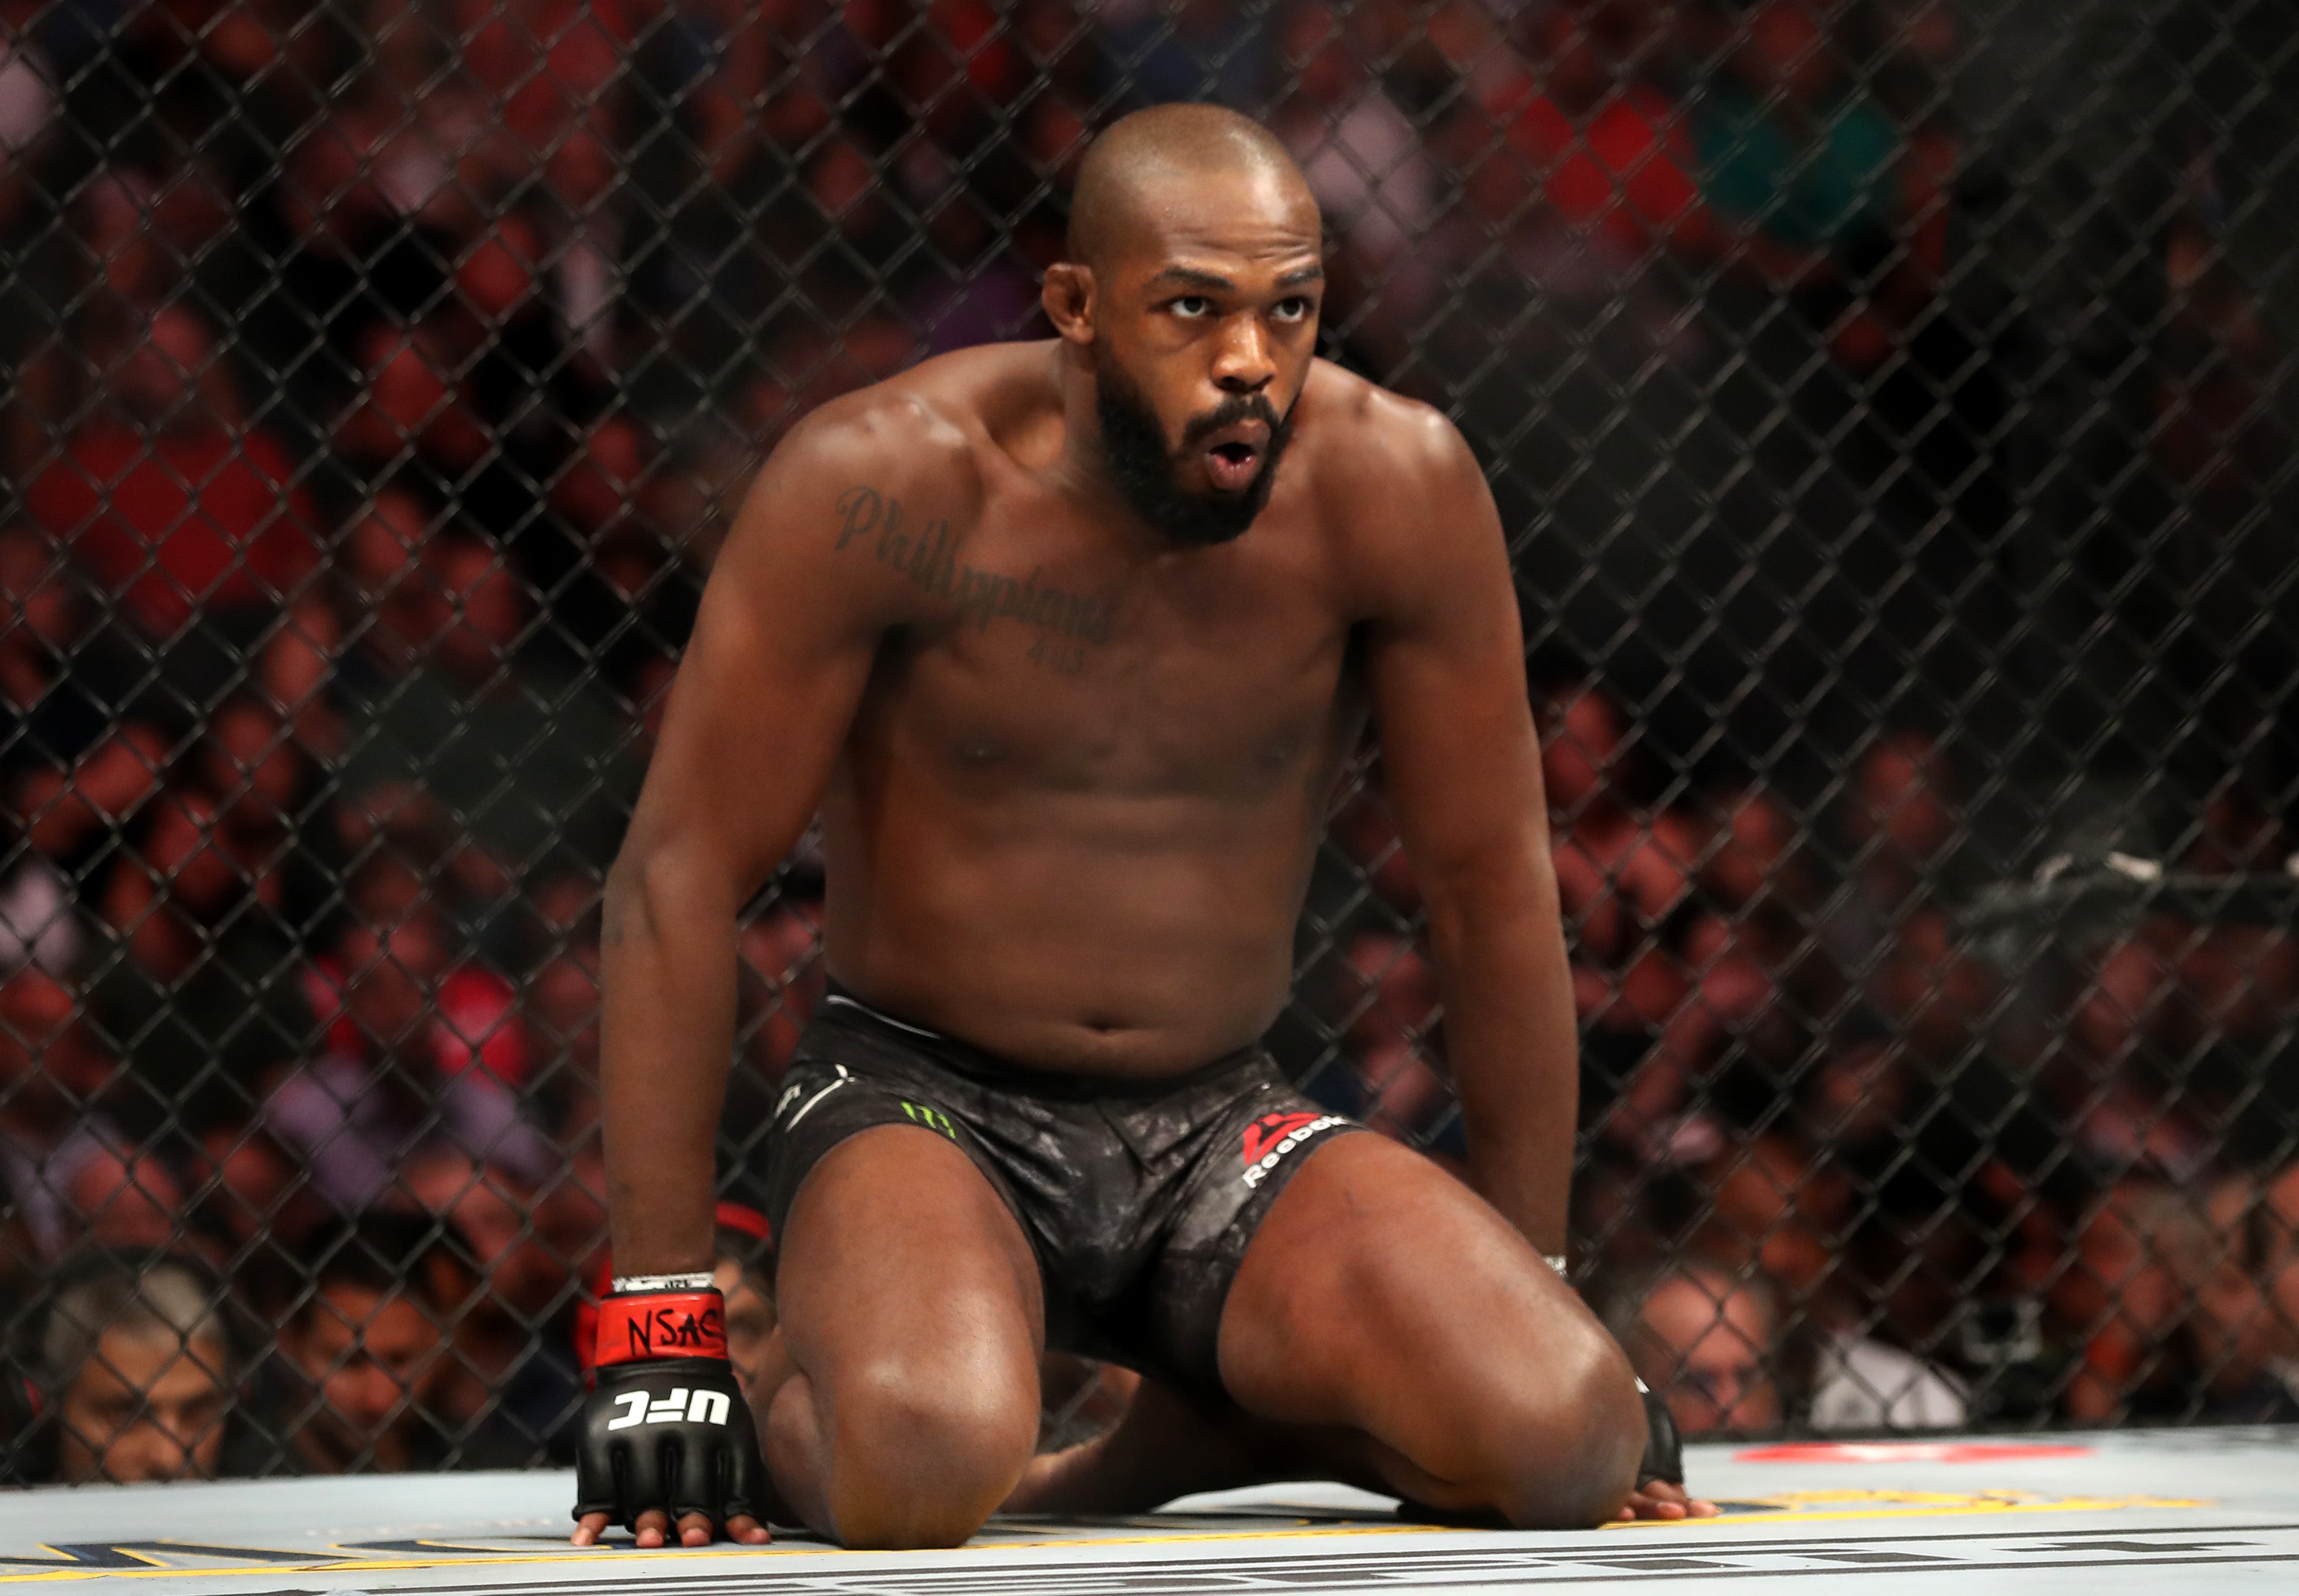 Jon Jones’ career has been overshadowed by indiscretions in and out of the ring